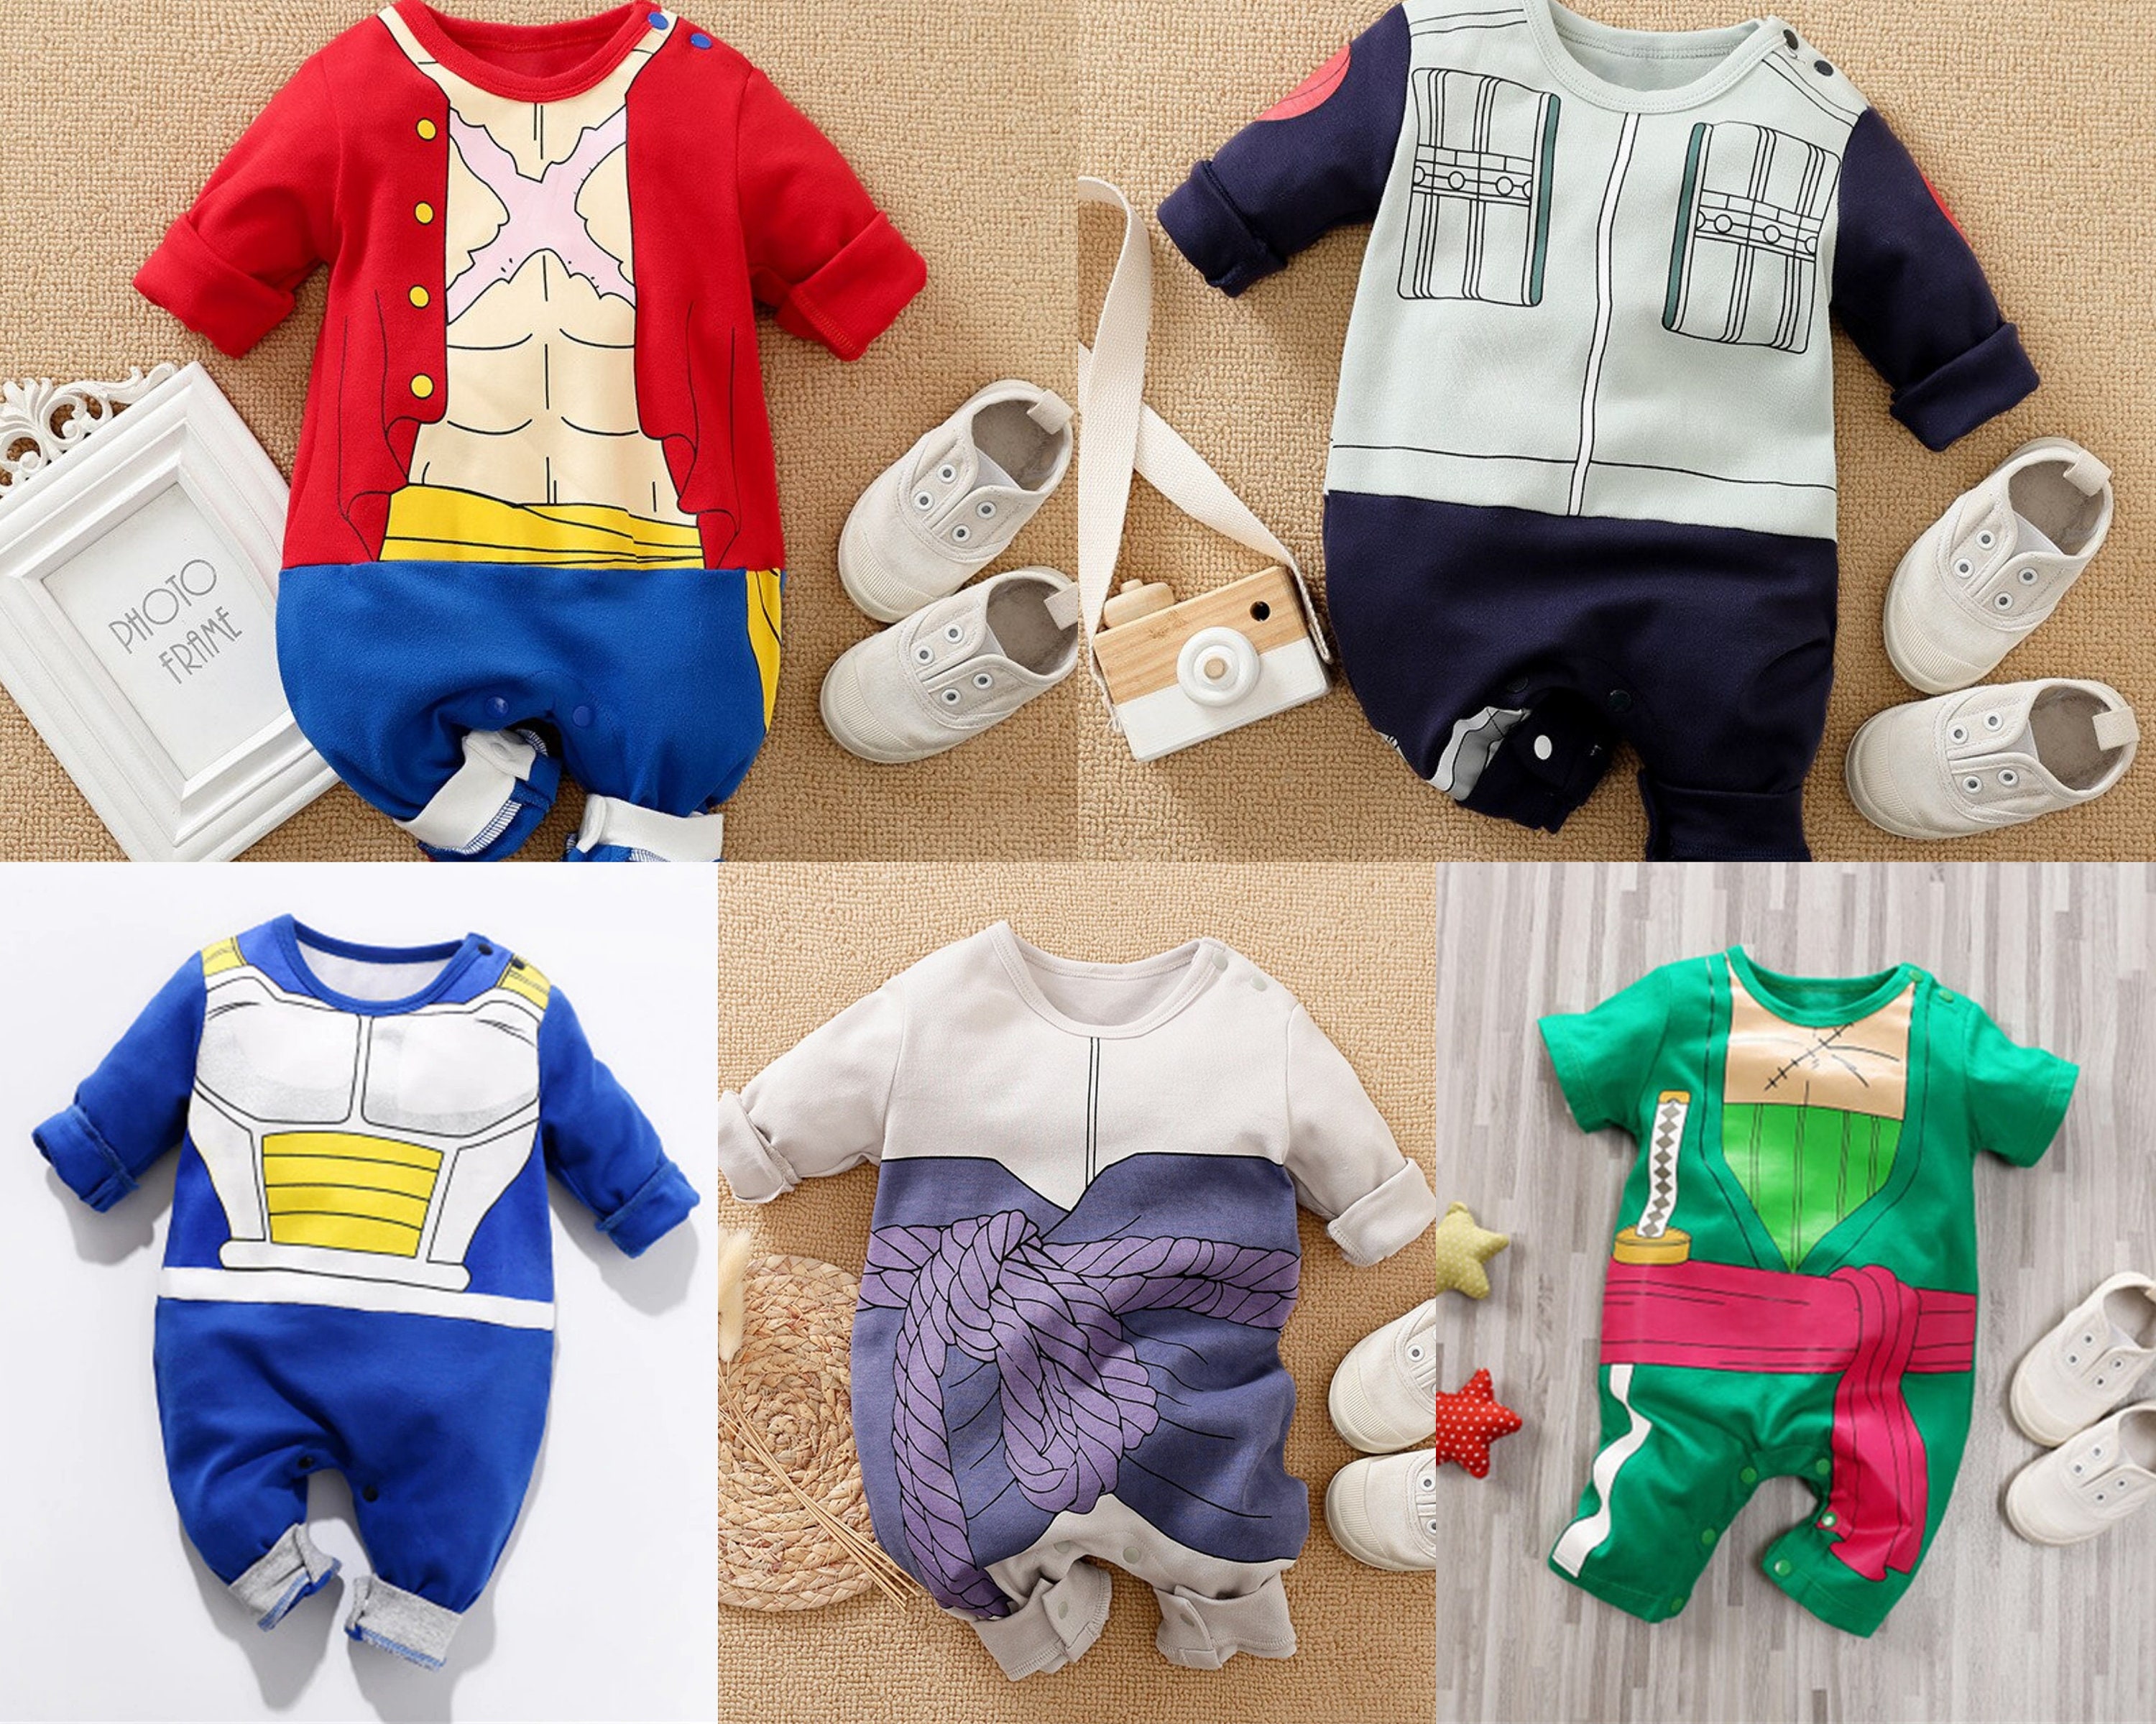 Baby Clothes Cartoon One Piece, One Piece Baby Clothes Anime